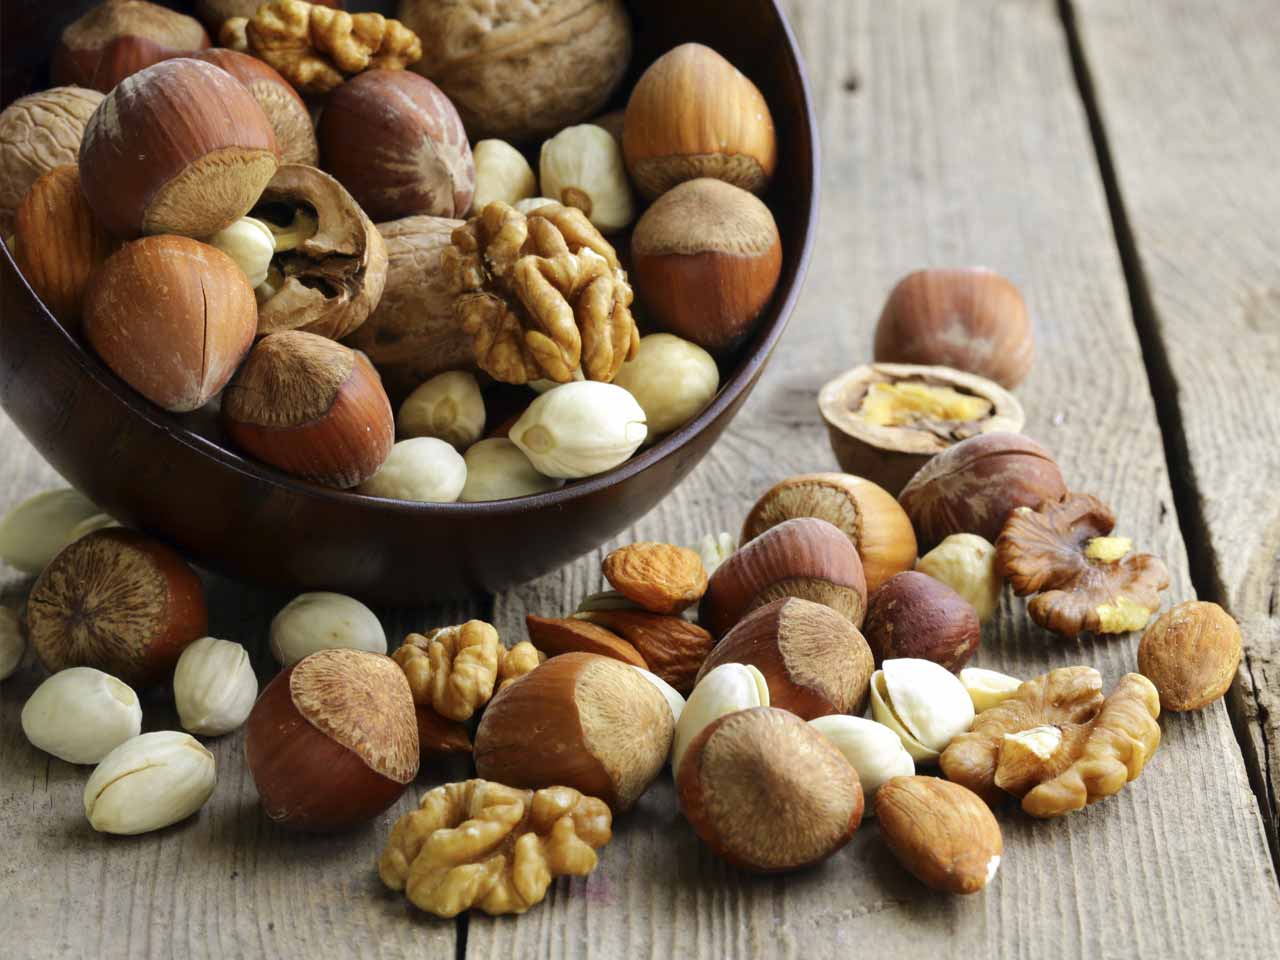 10 reasons to eat more nuts